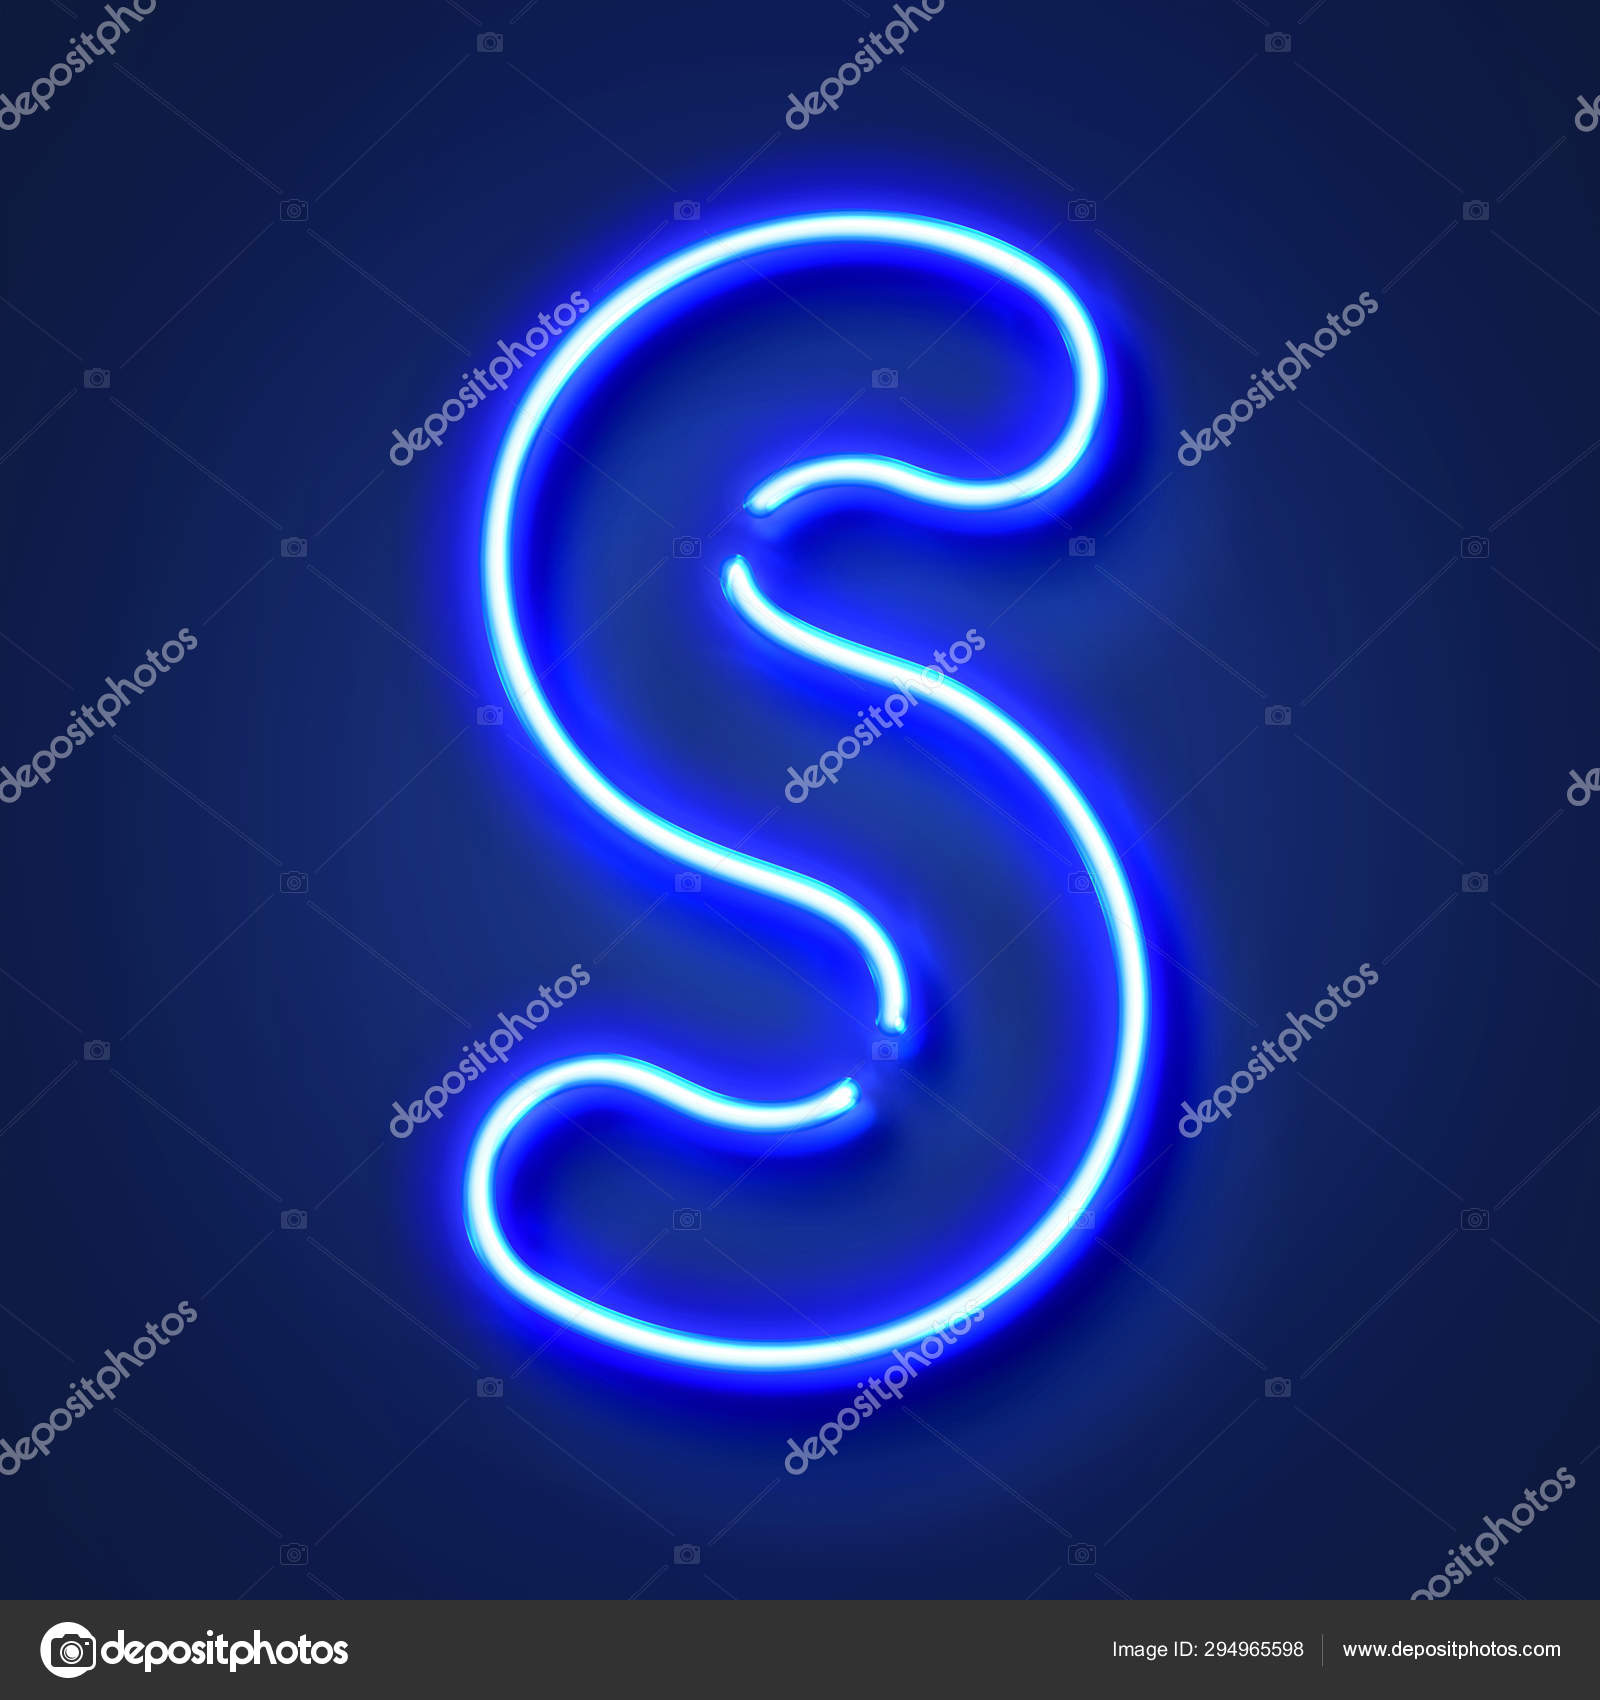 Letter capital s Stock Photos, Royalty Free Letter capital s Images |  Depositphotos